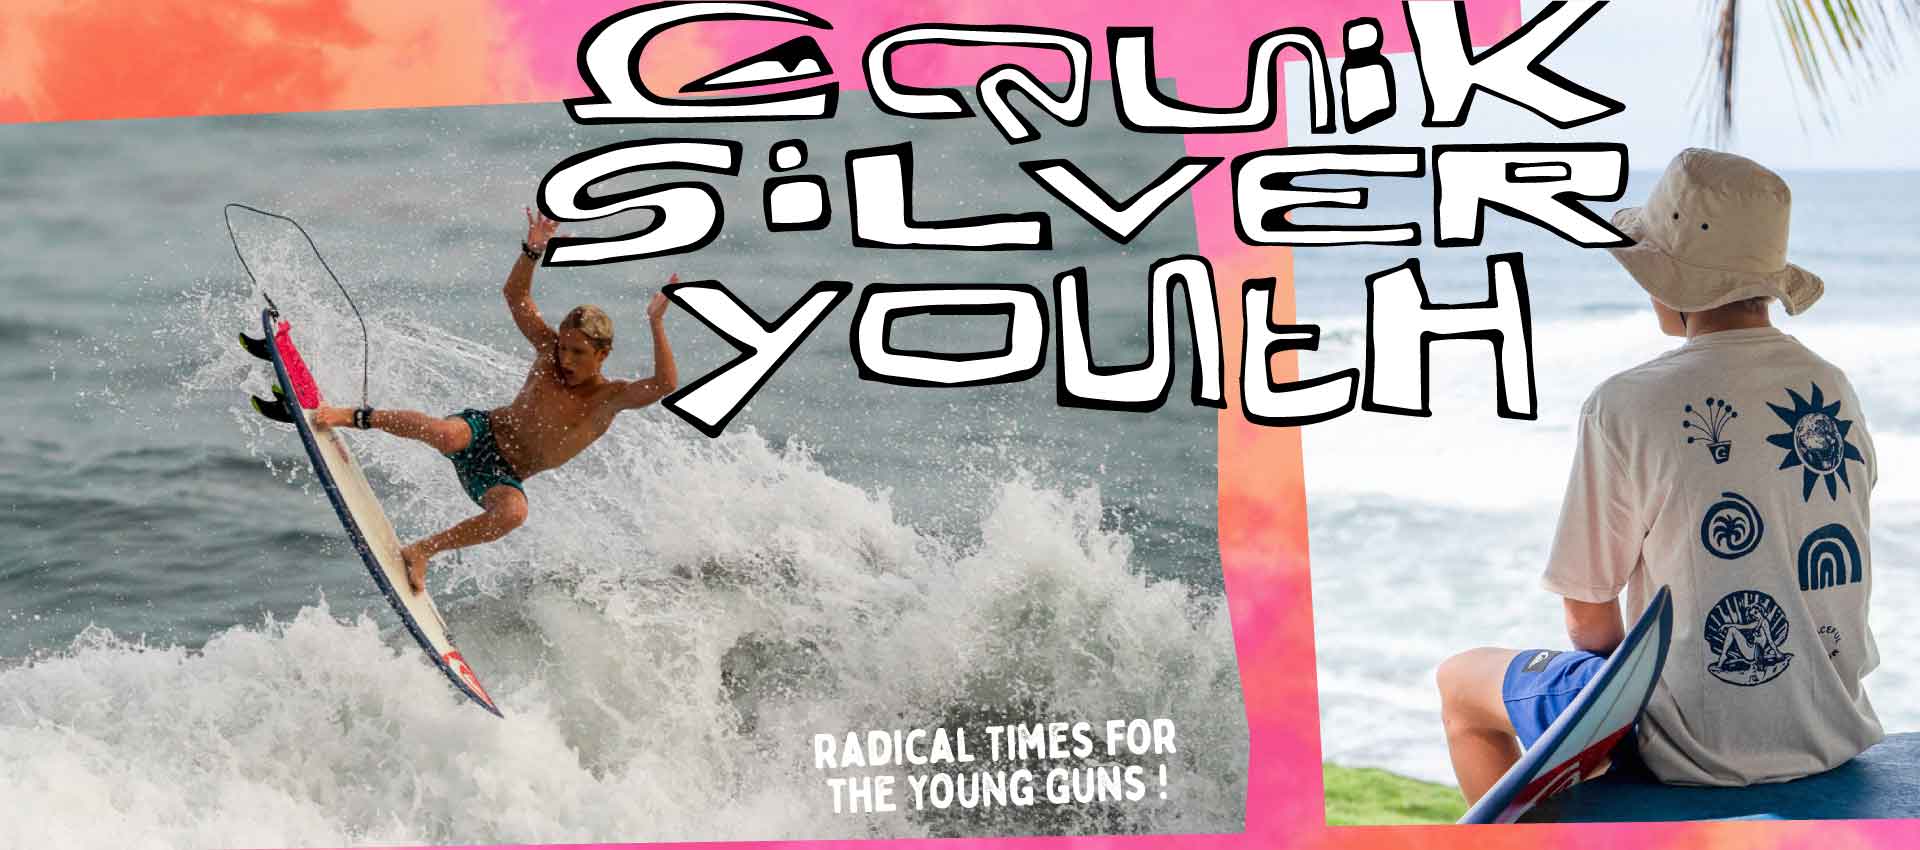 Quiksilver Youth